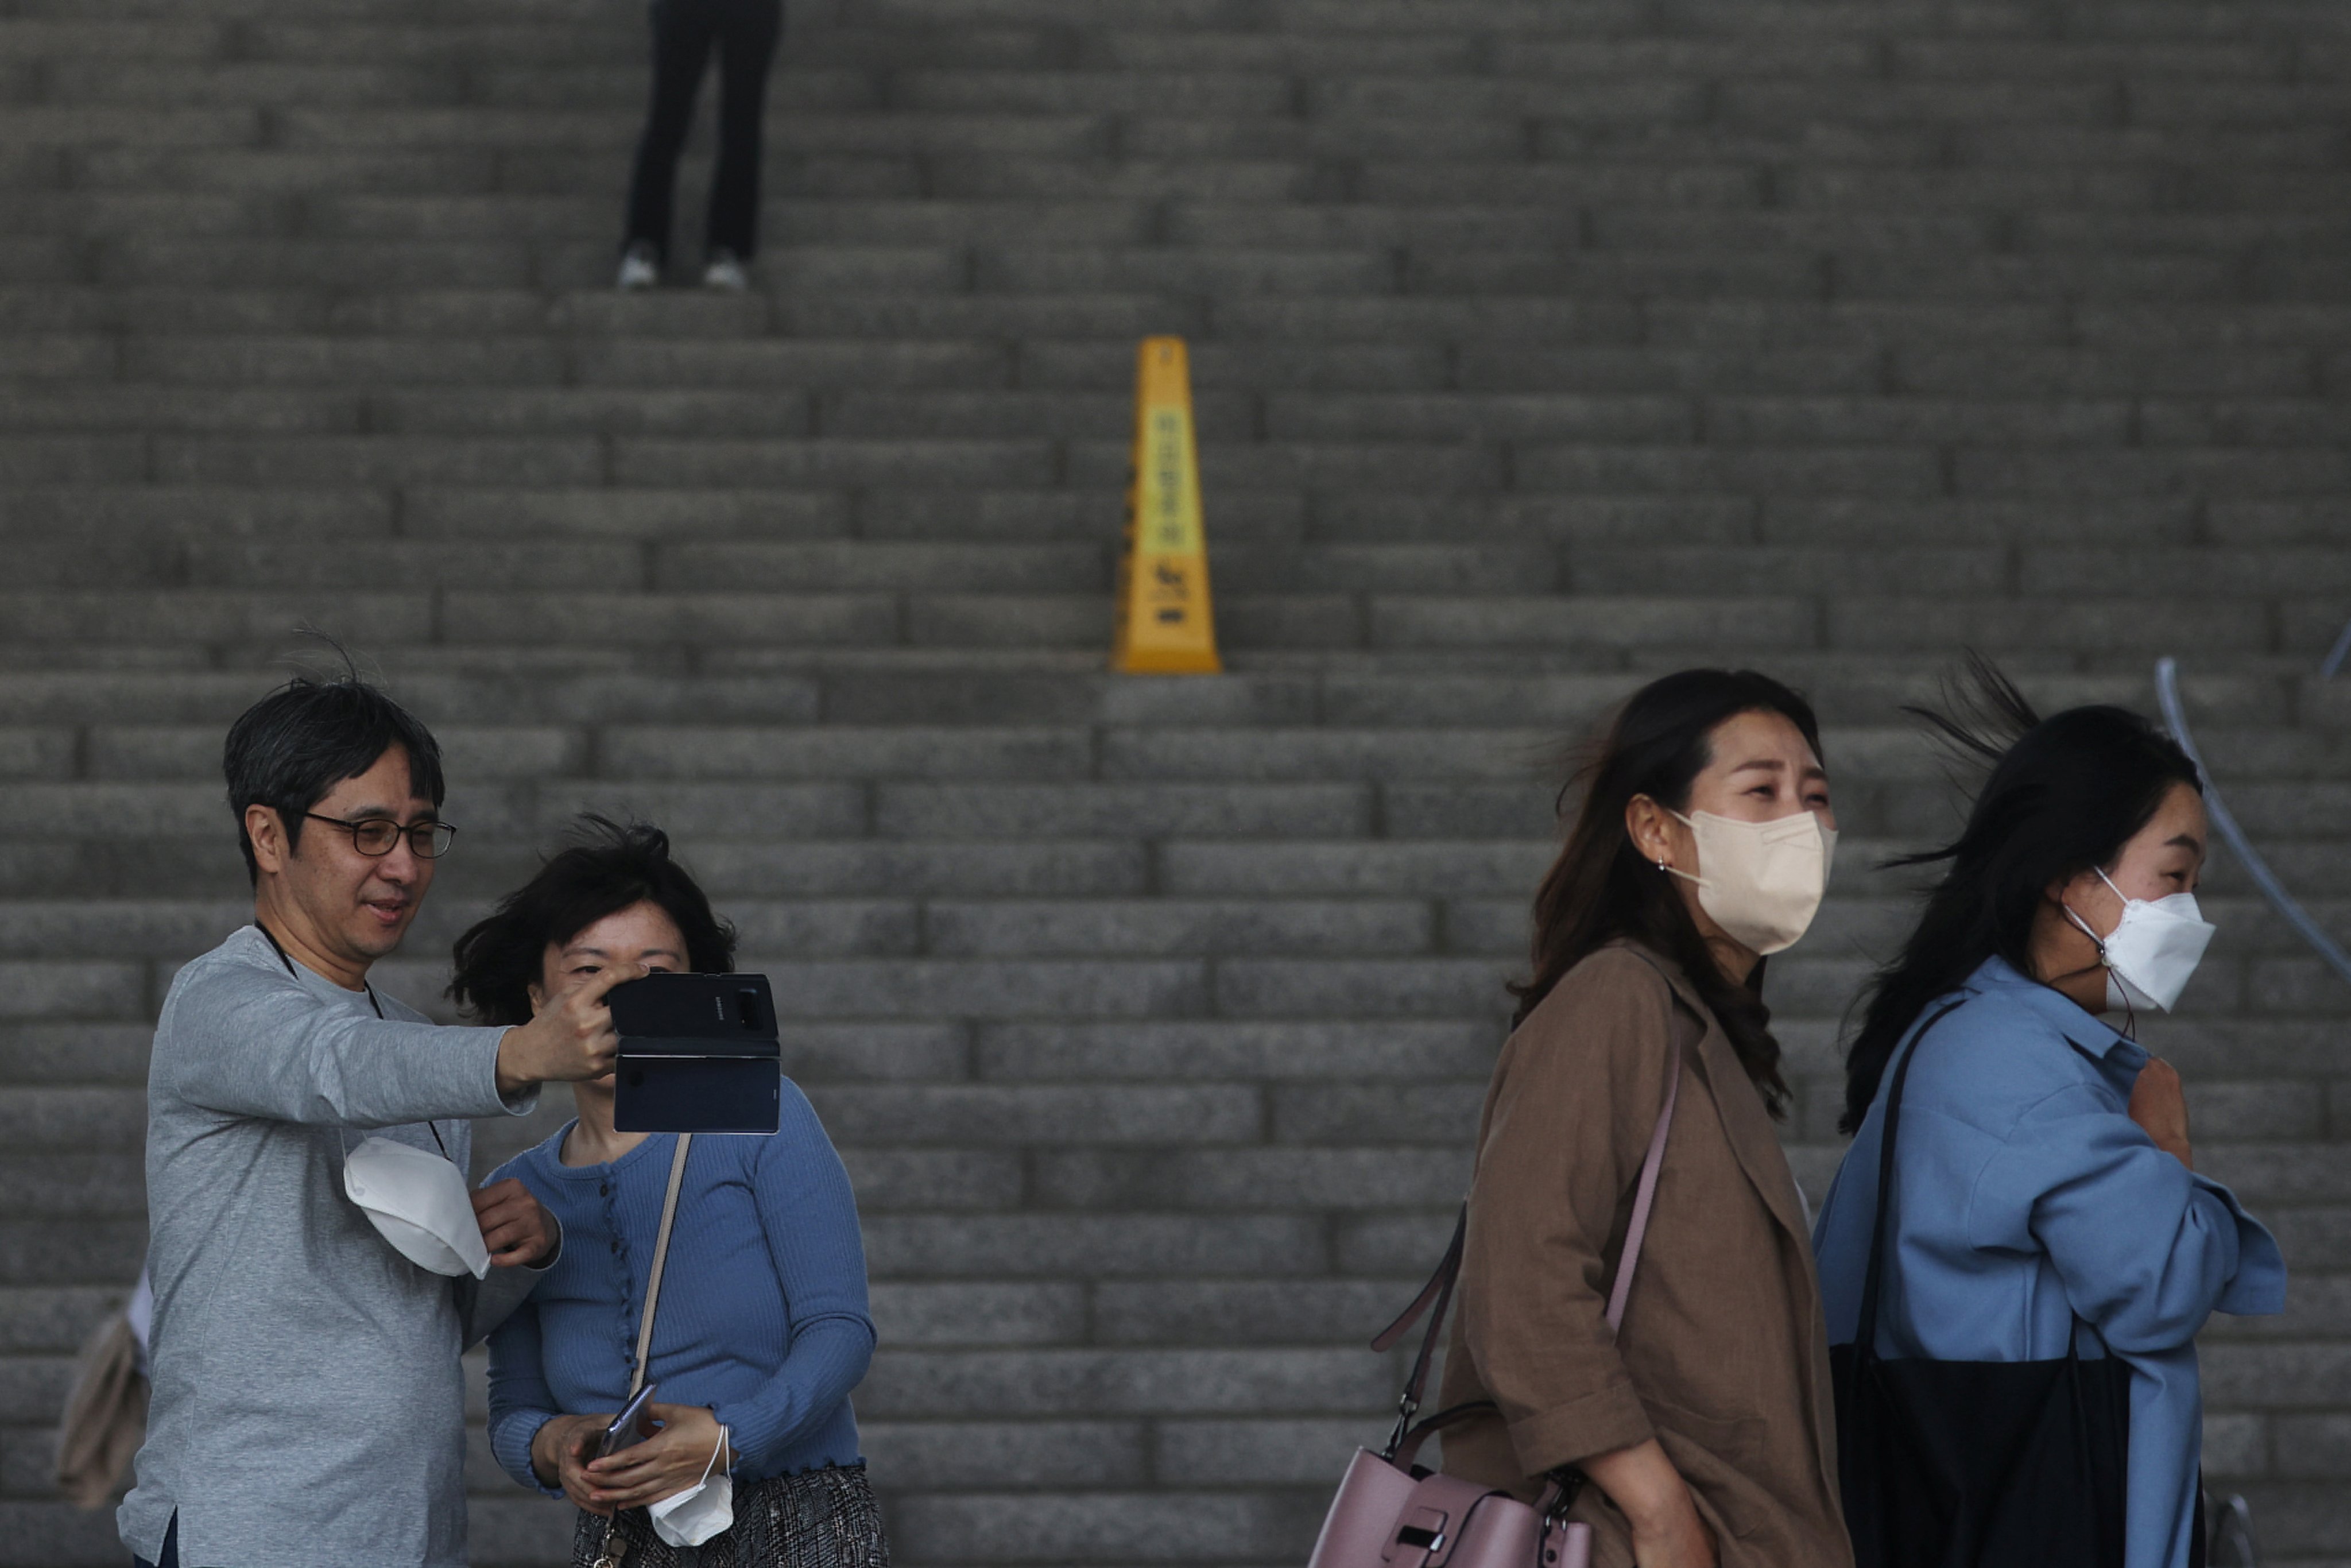 Women wearing protective masks to prevent contracting Covid-19 walk past a couple who takes a selfie photo without masks in Seoul, South Korea on Monday. Photo: Reuters